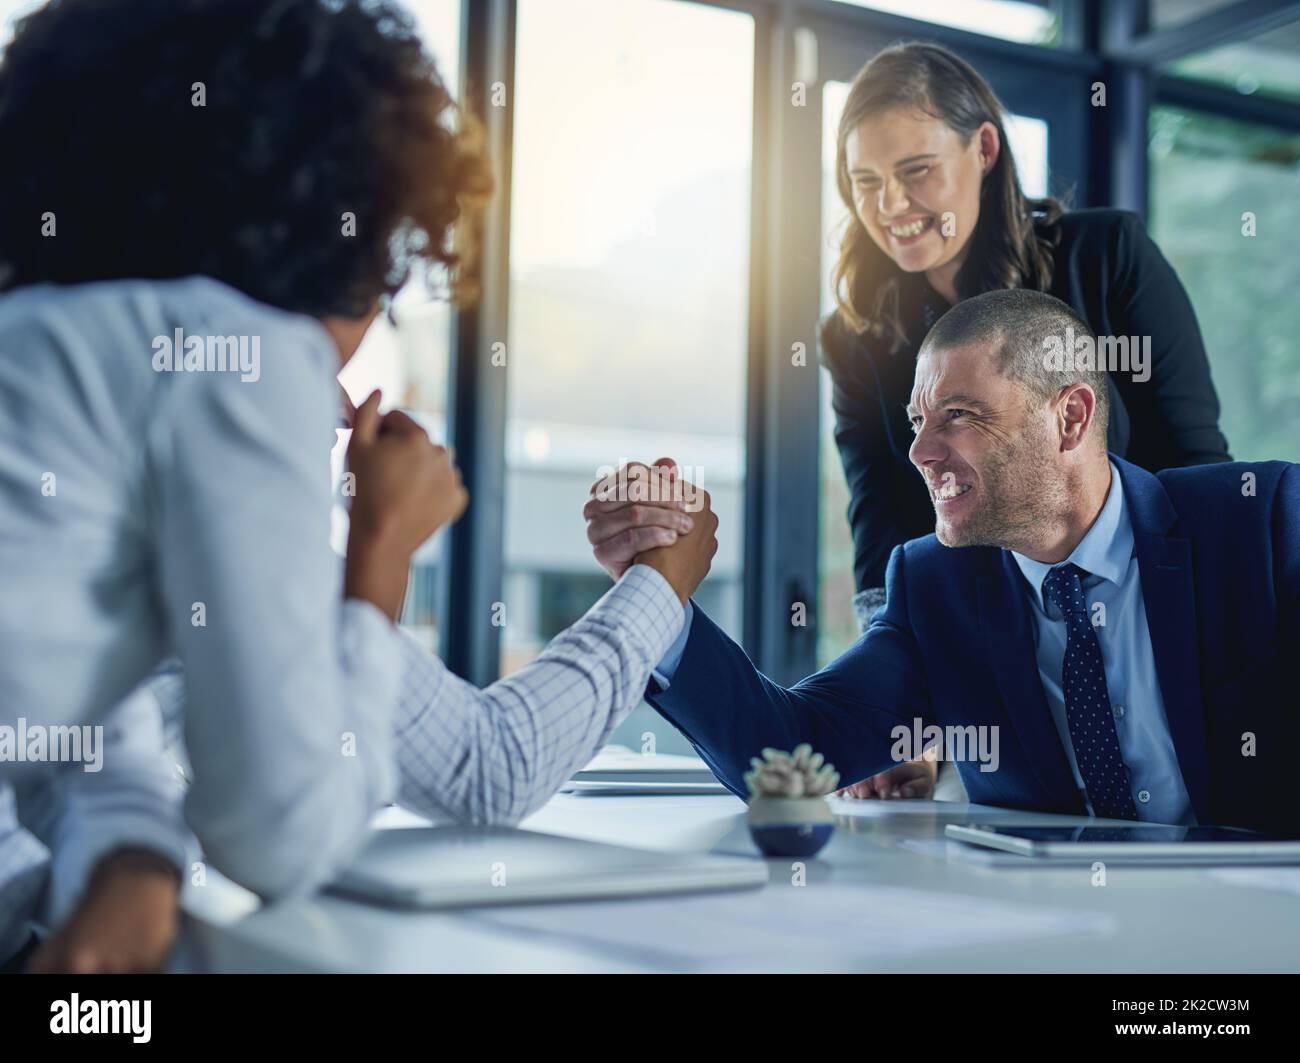 Theyre at loggerheads. Shot of two businesspeople arm wrestling during a meeting in the boardroom. Stock Photo